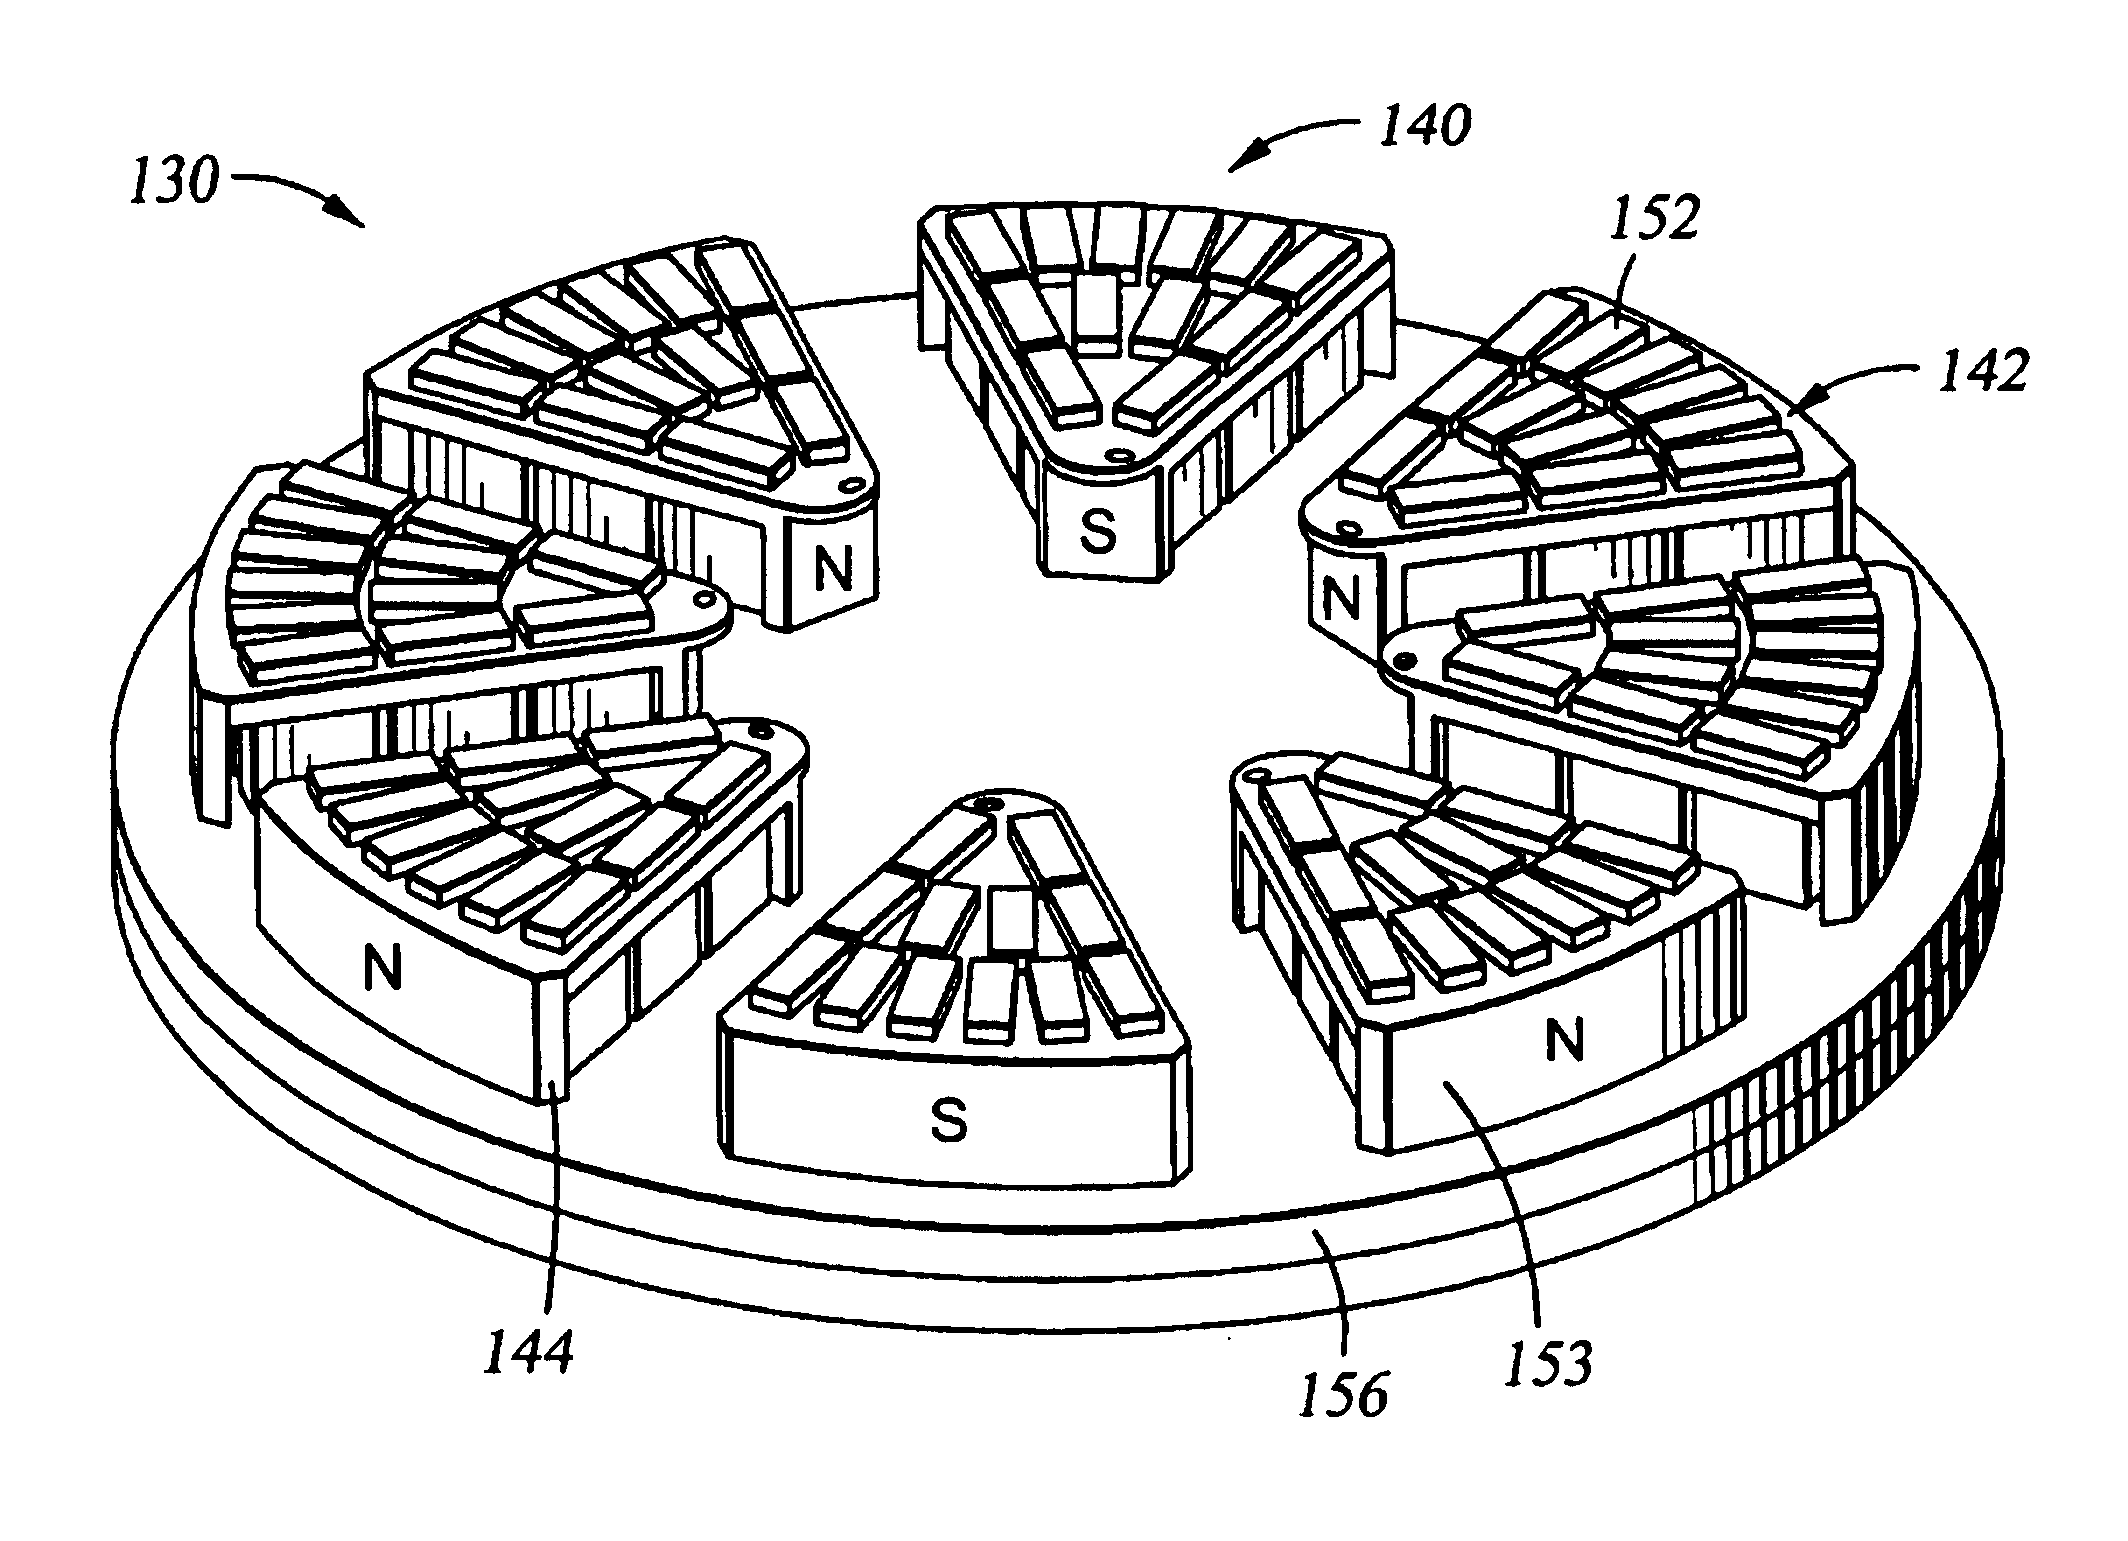 Temperature controlled window with a fluid supply system